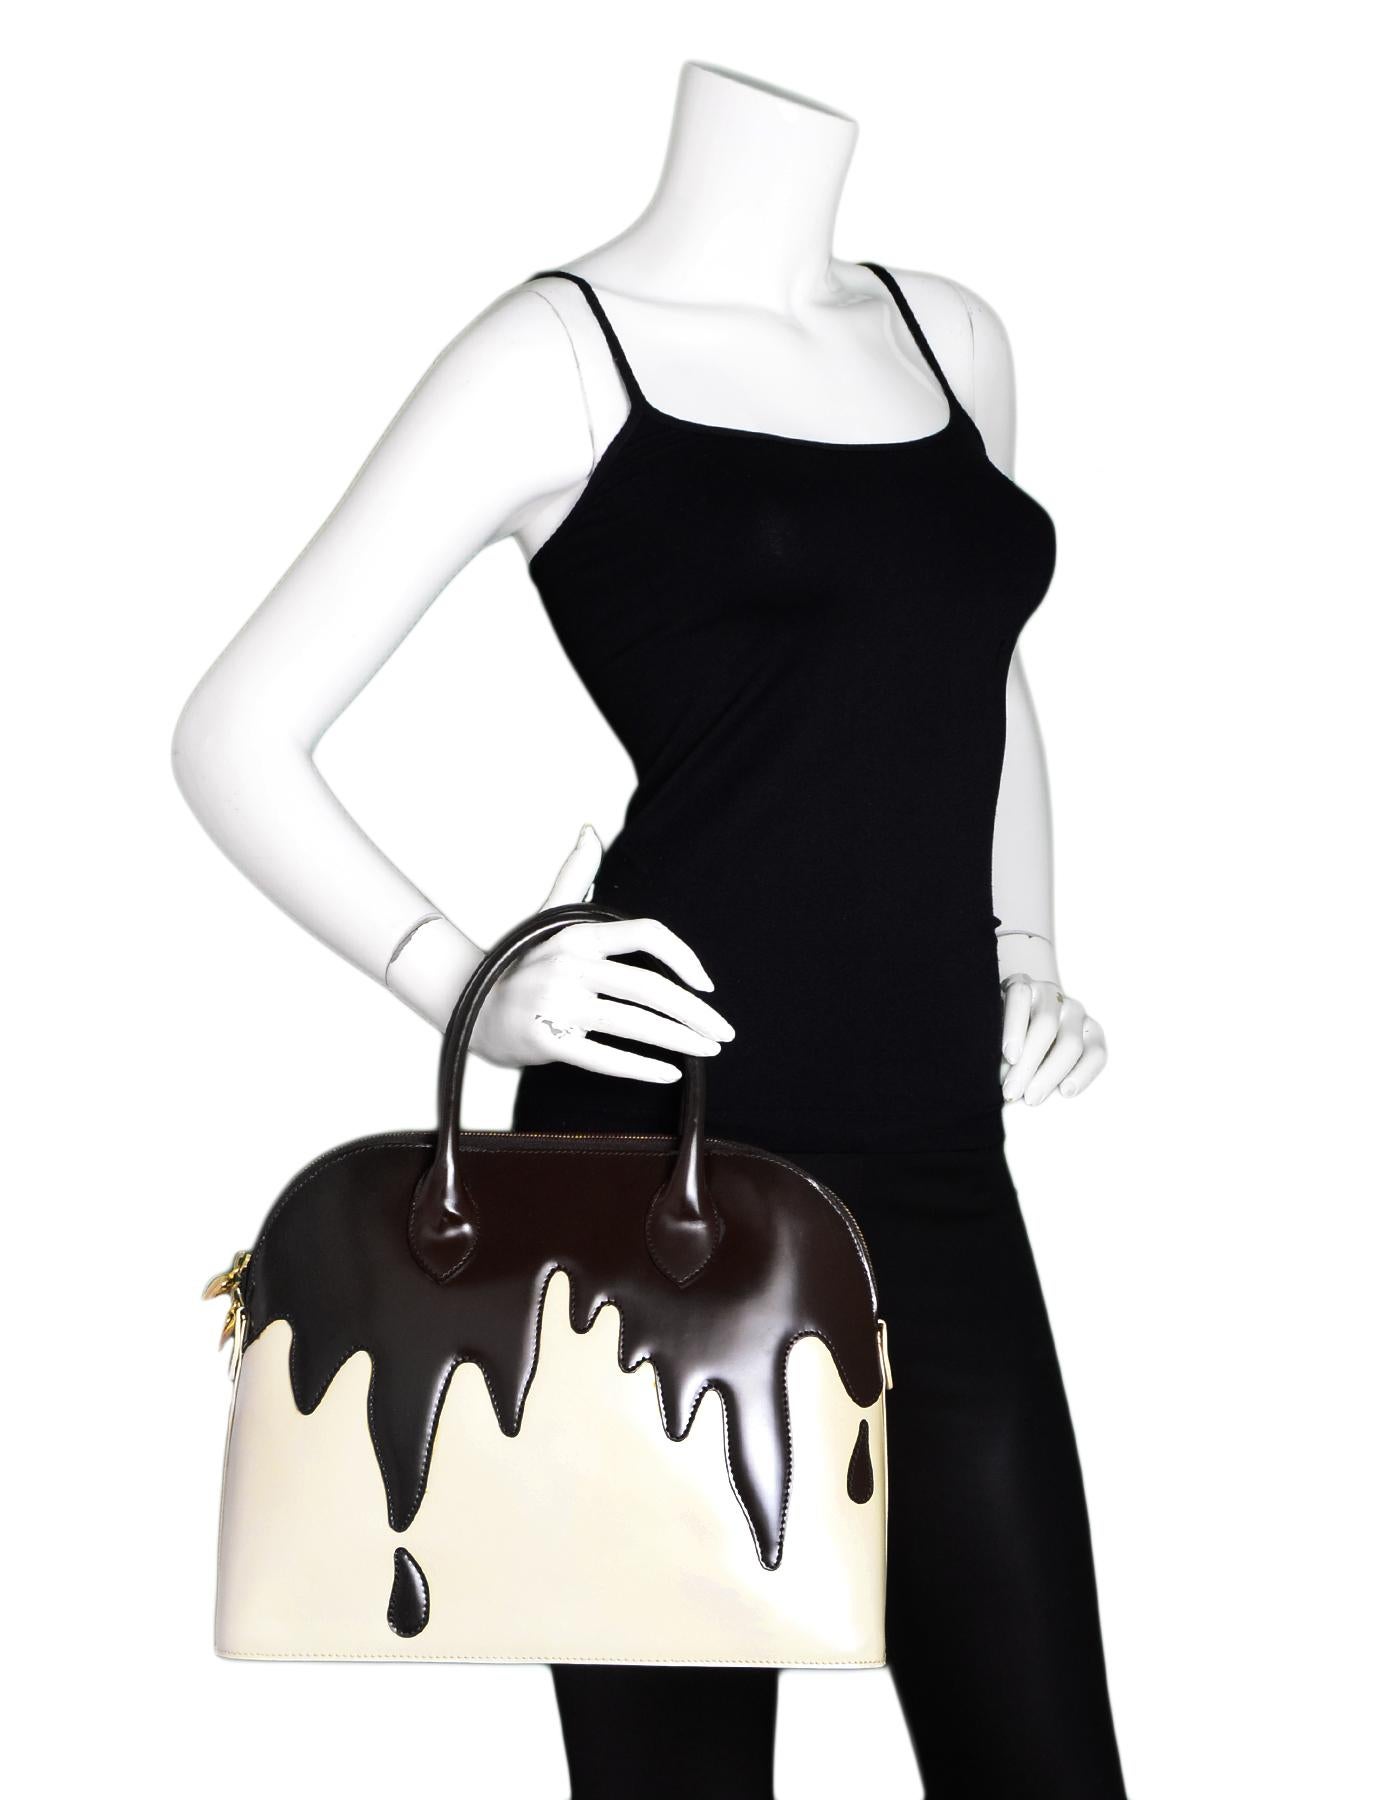 Moschino Brown/Cream Patent Leather Dripping Chocolate Bag W/ DB

Color: Brown/cream
Hardware: Goldtone
Materials: Patent leather, metal
Lining: Tan satin textile
Closure/Opening: Zip top
Exterior Pockets: None
Interior Pockets: One zippered wall